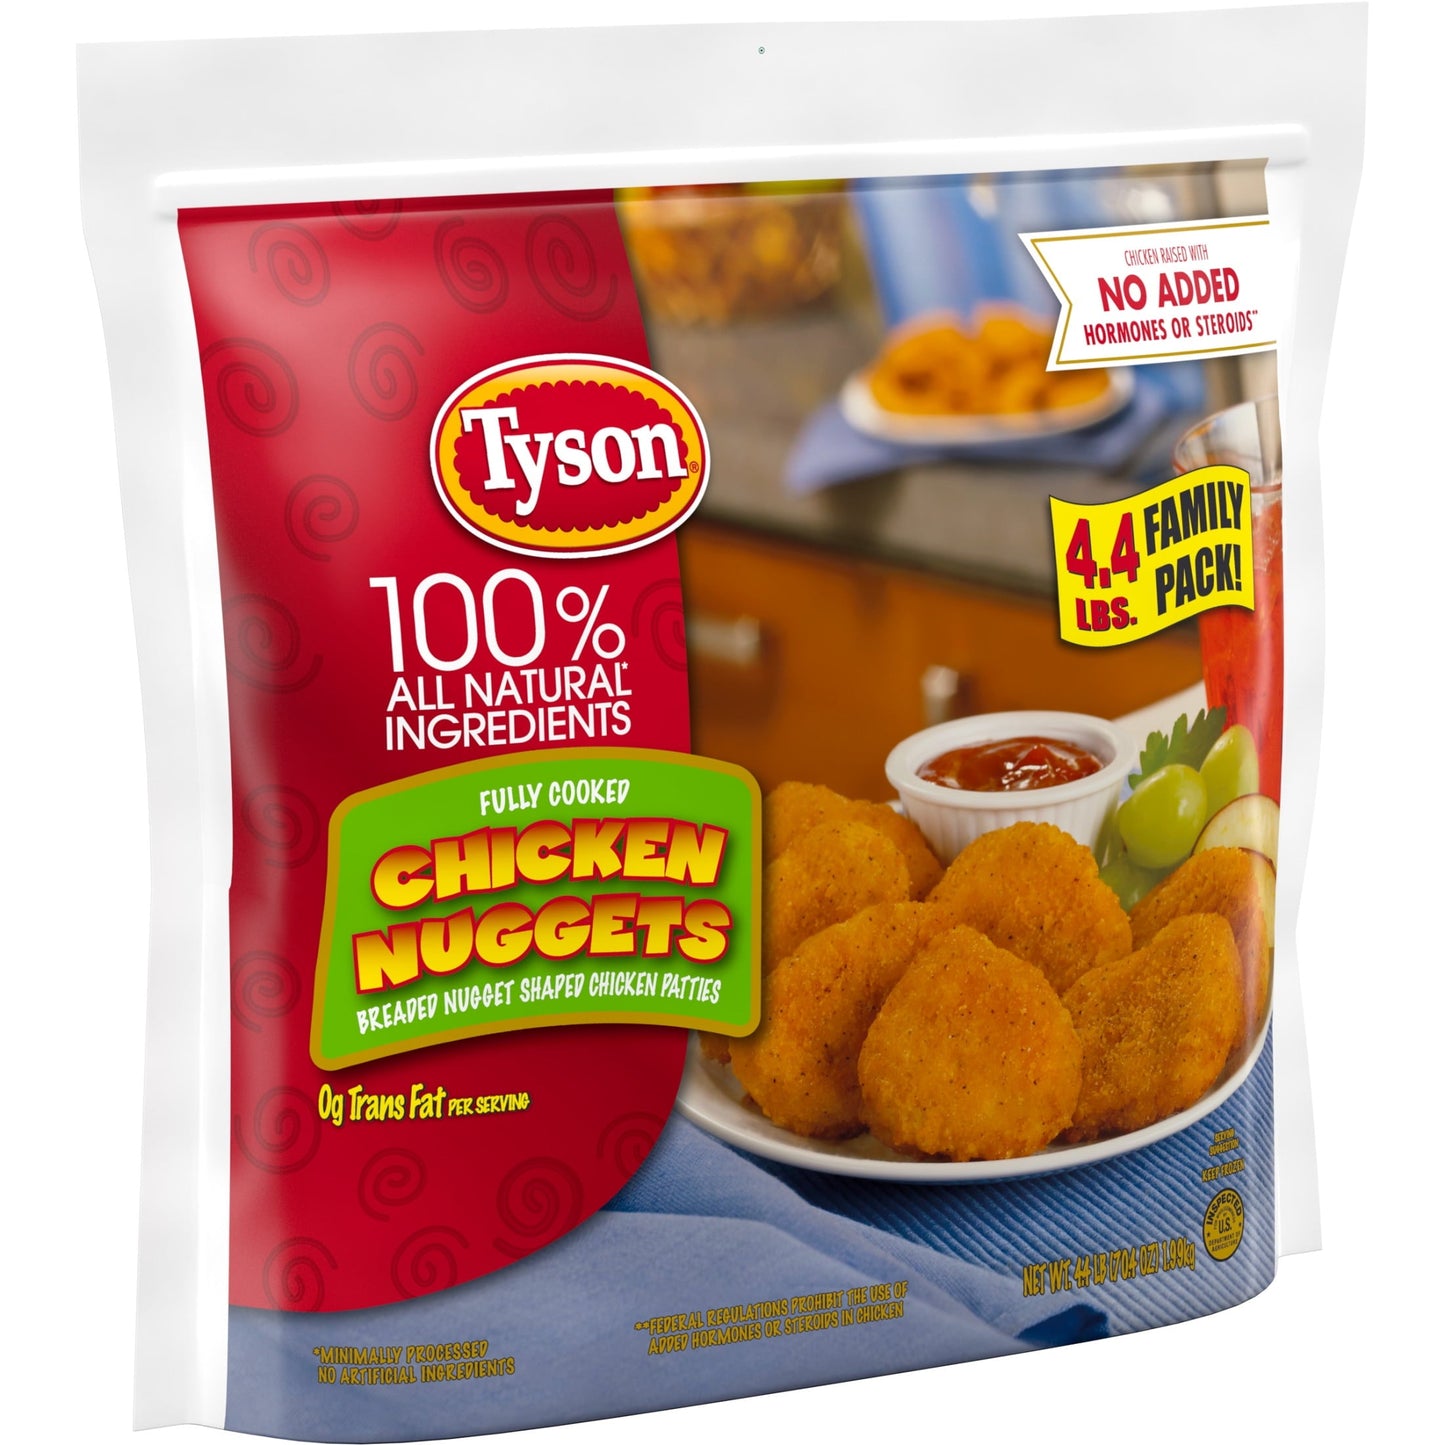 Tyson All Natural Fully Cooked Chicken Nuggets, 4.4 lb Bag (Frozen)